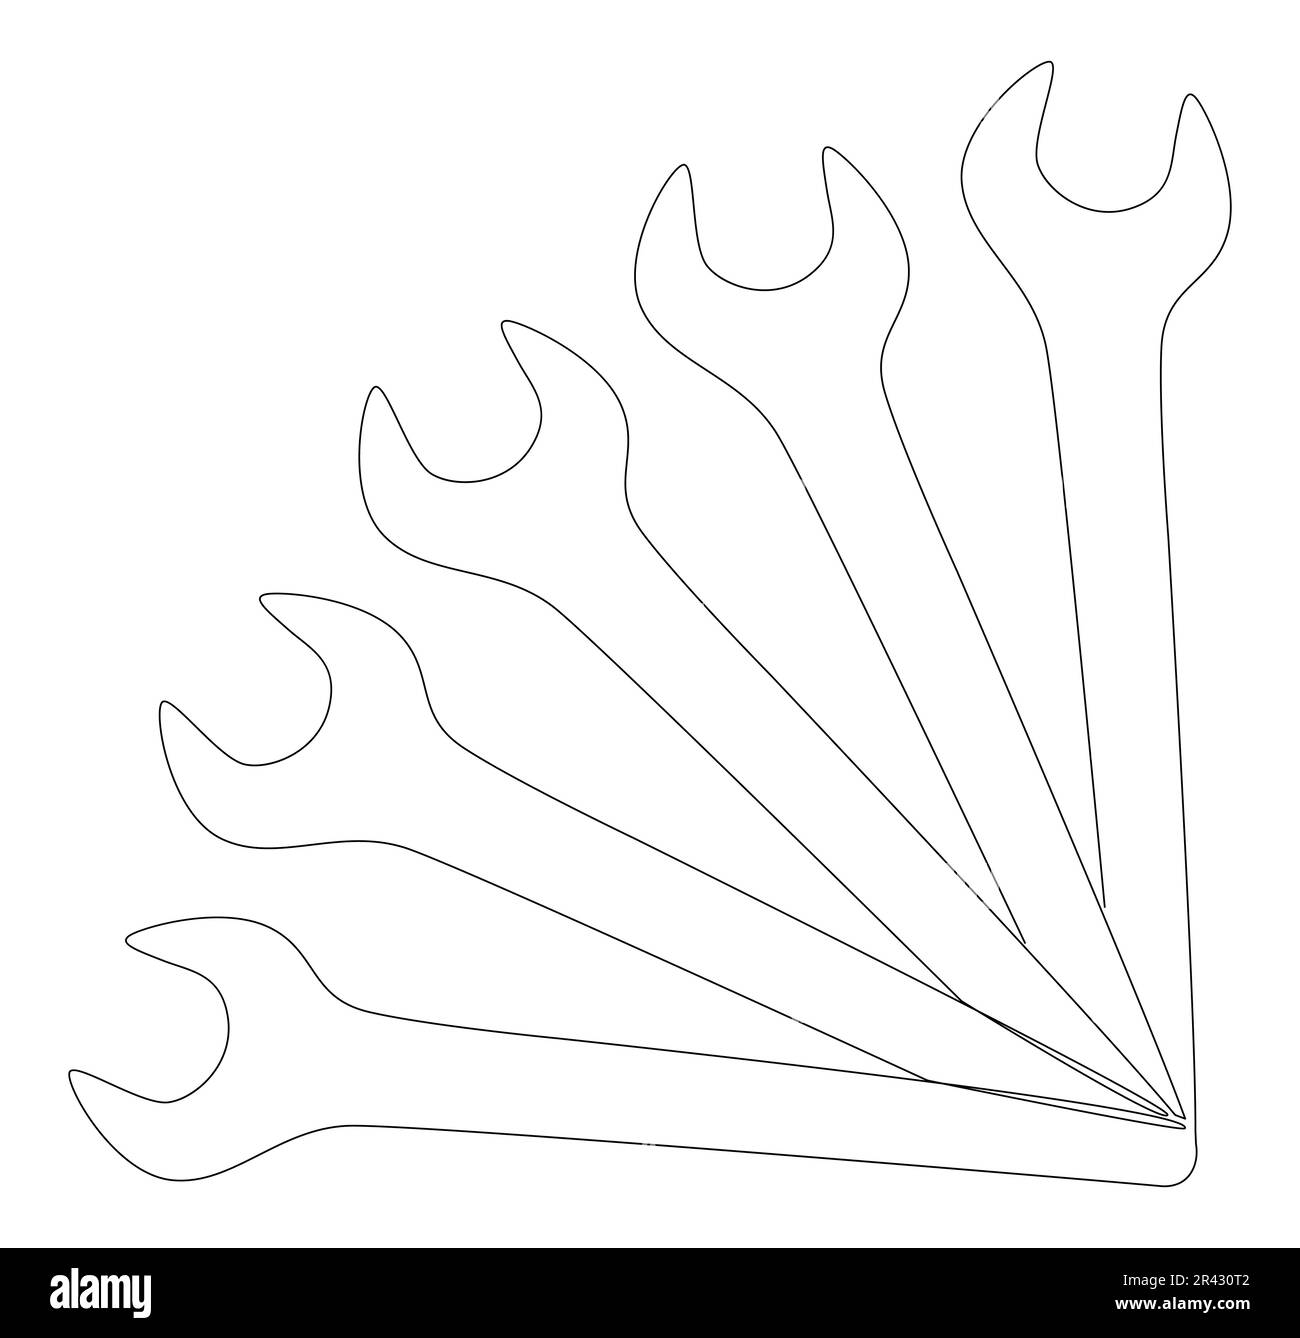 One continuous line of Wrench. Thin Line Illustration vector Work Tool concept. Contour Drawing Creative ideas. Stock Vector